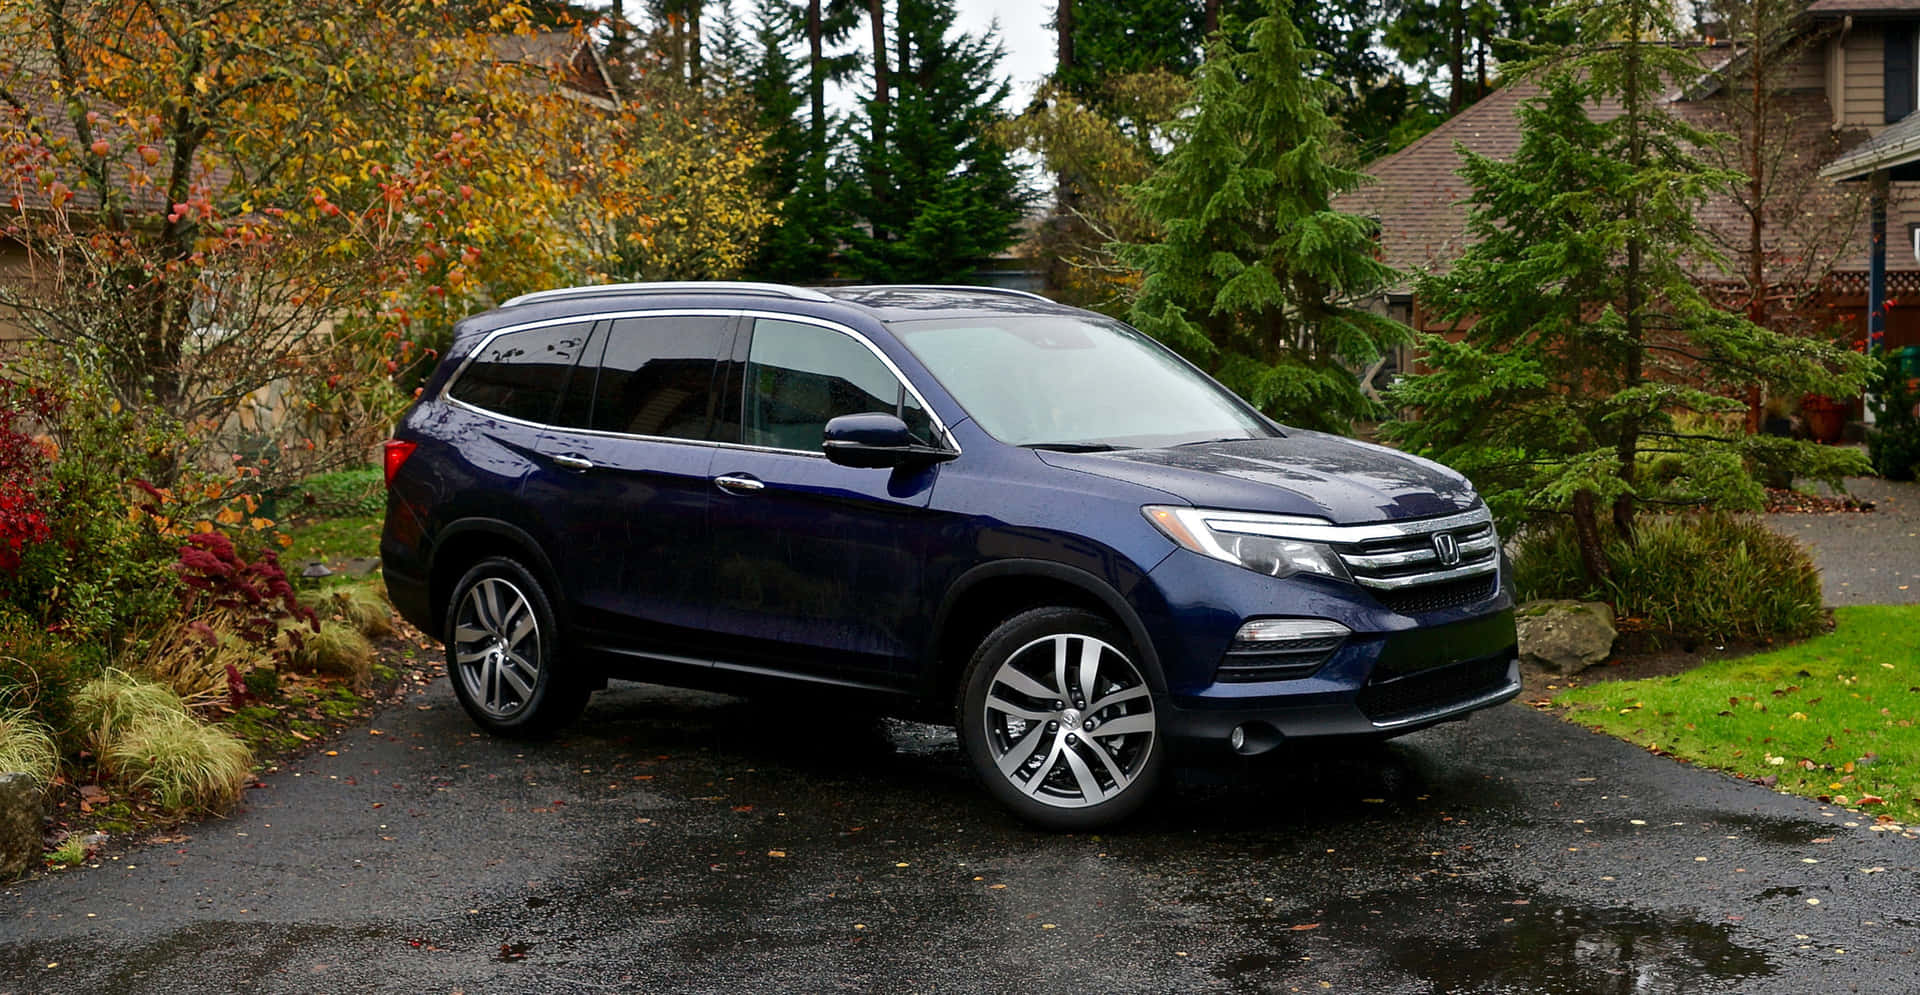 “Experience the Comfort and Performance of a Honda Pilot.”